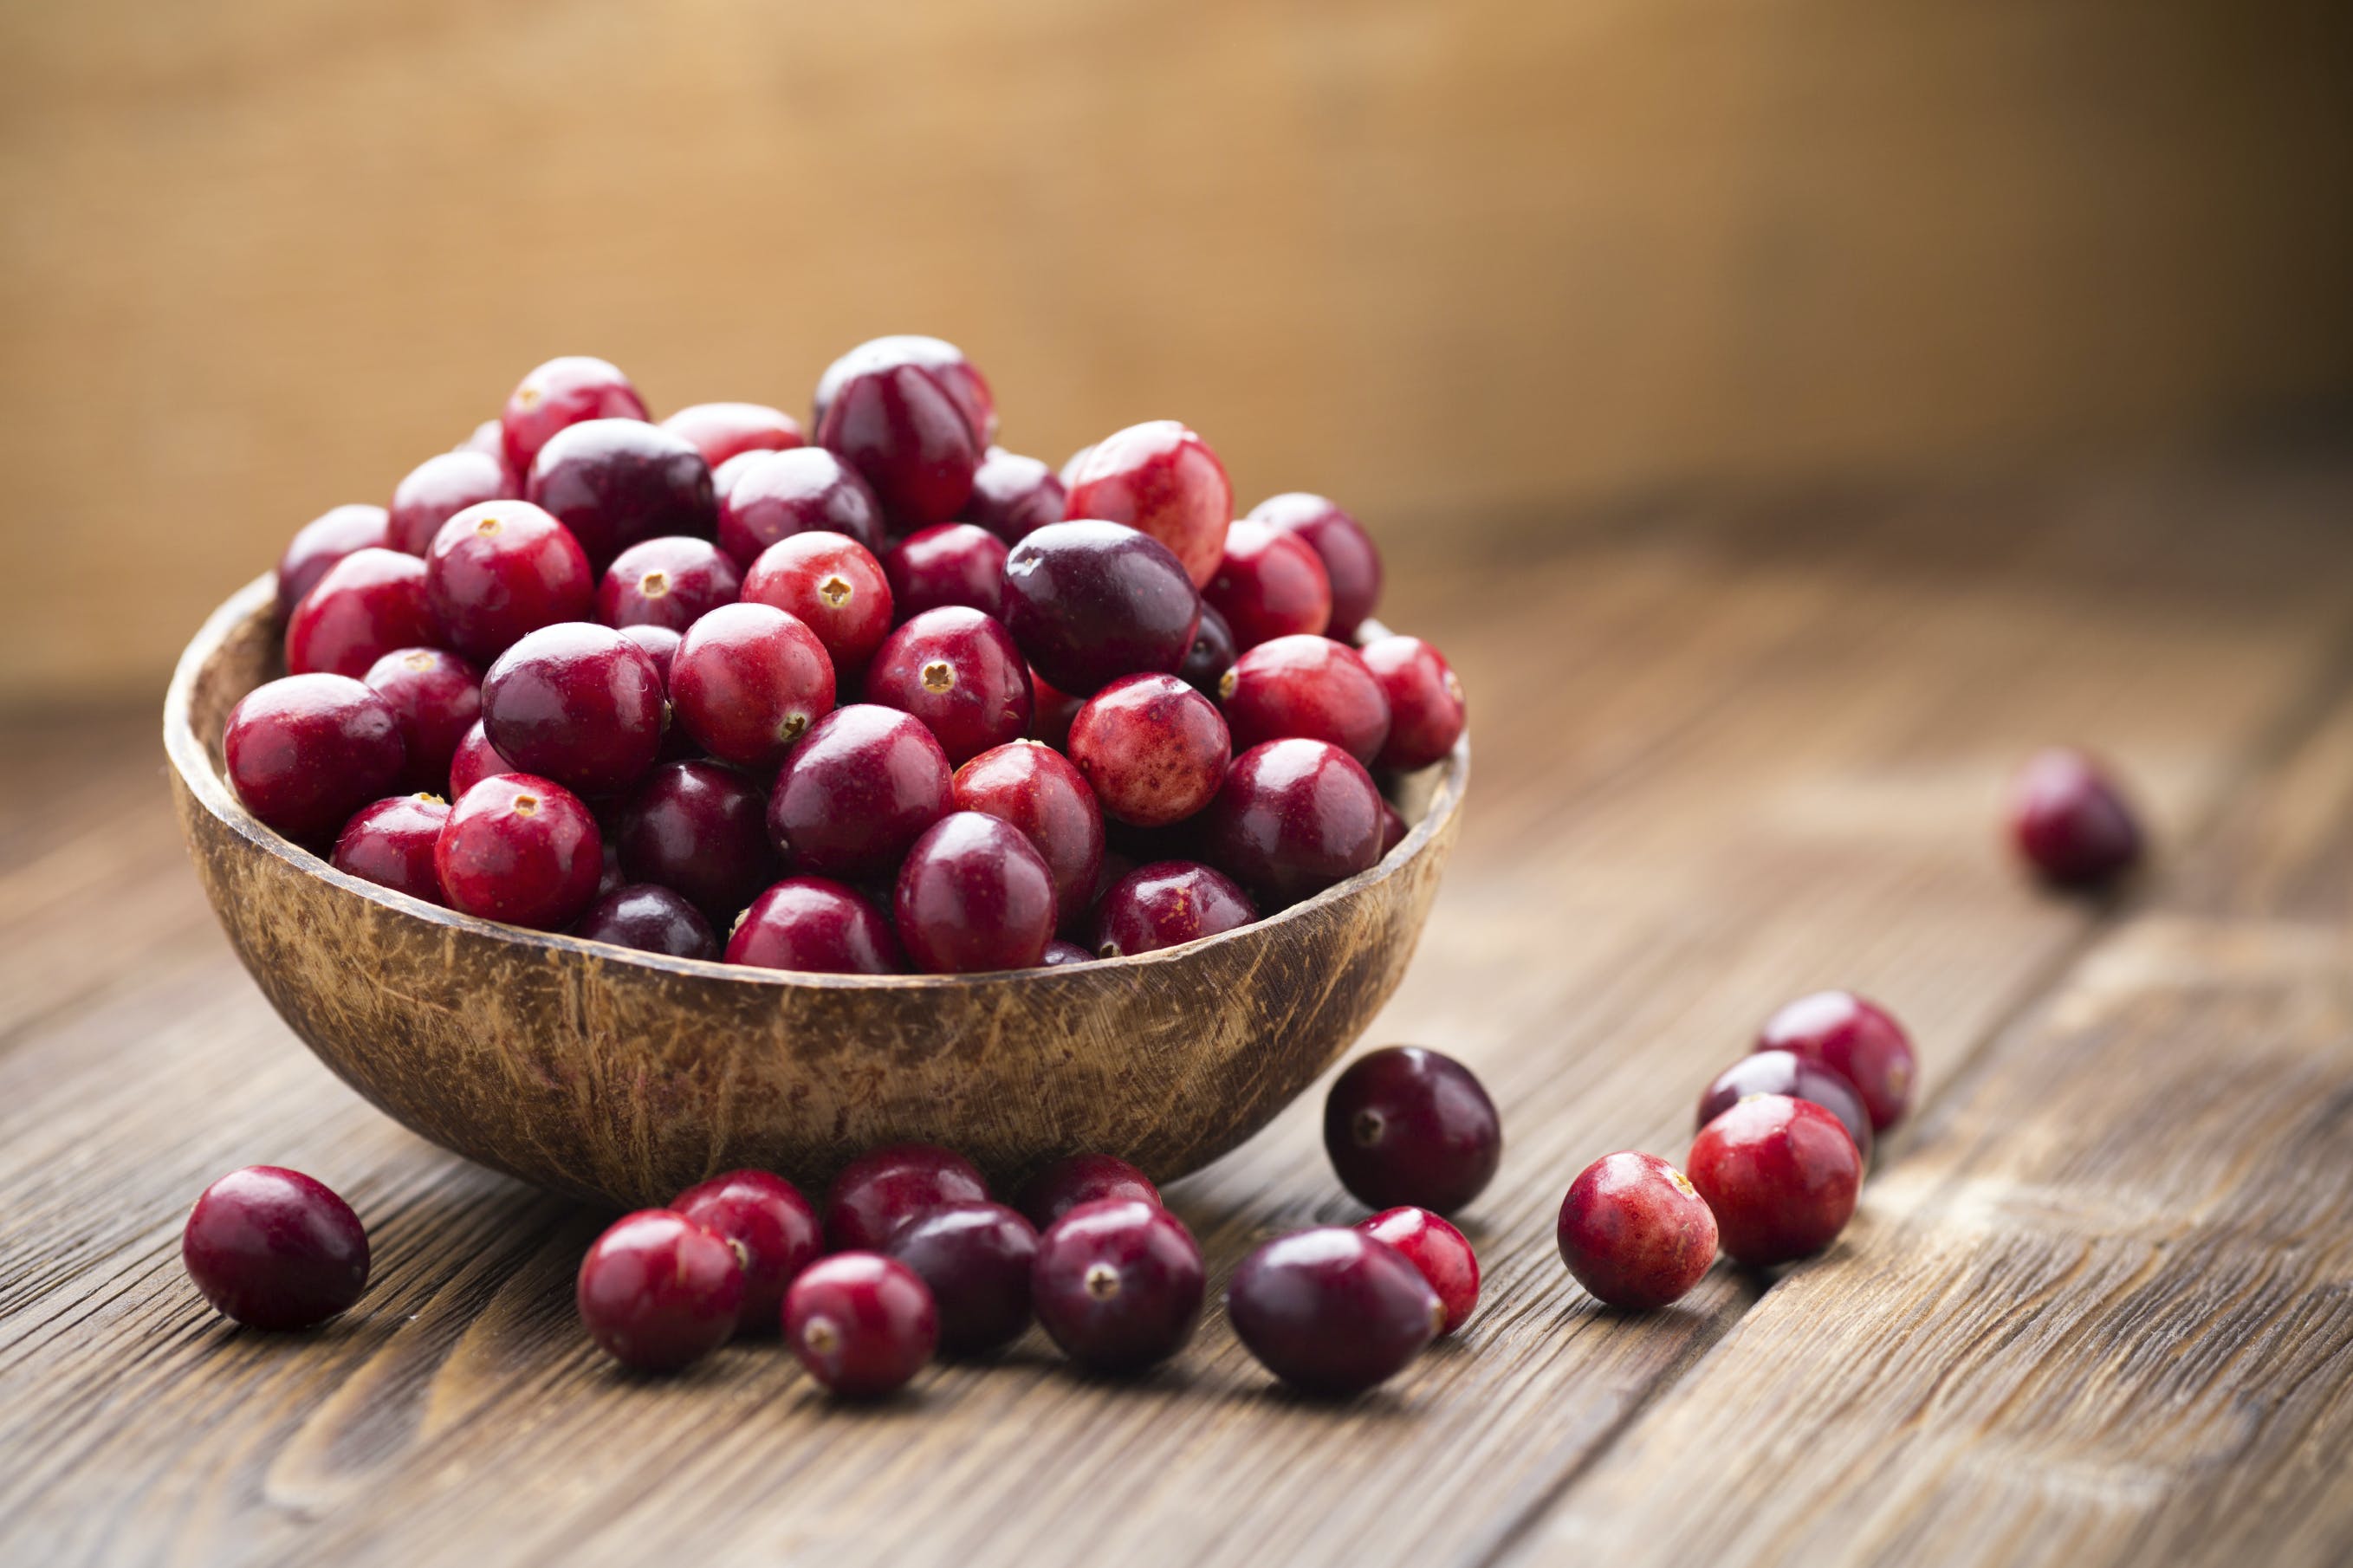 Why You Should Add Cranberries to Your Diet